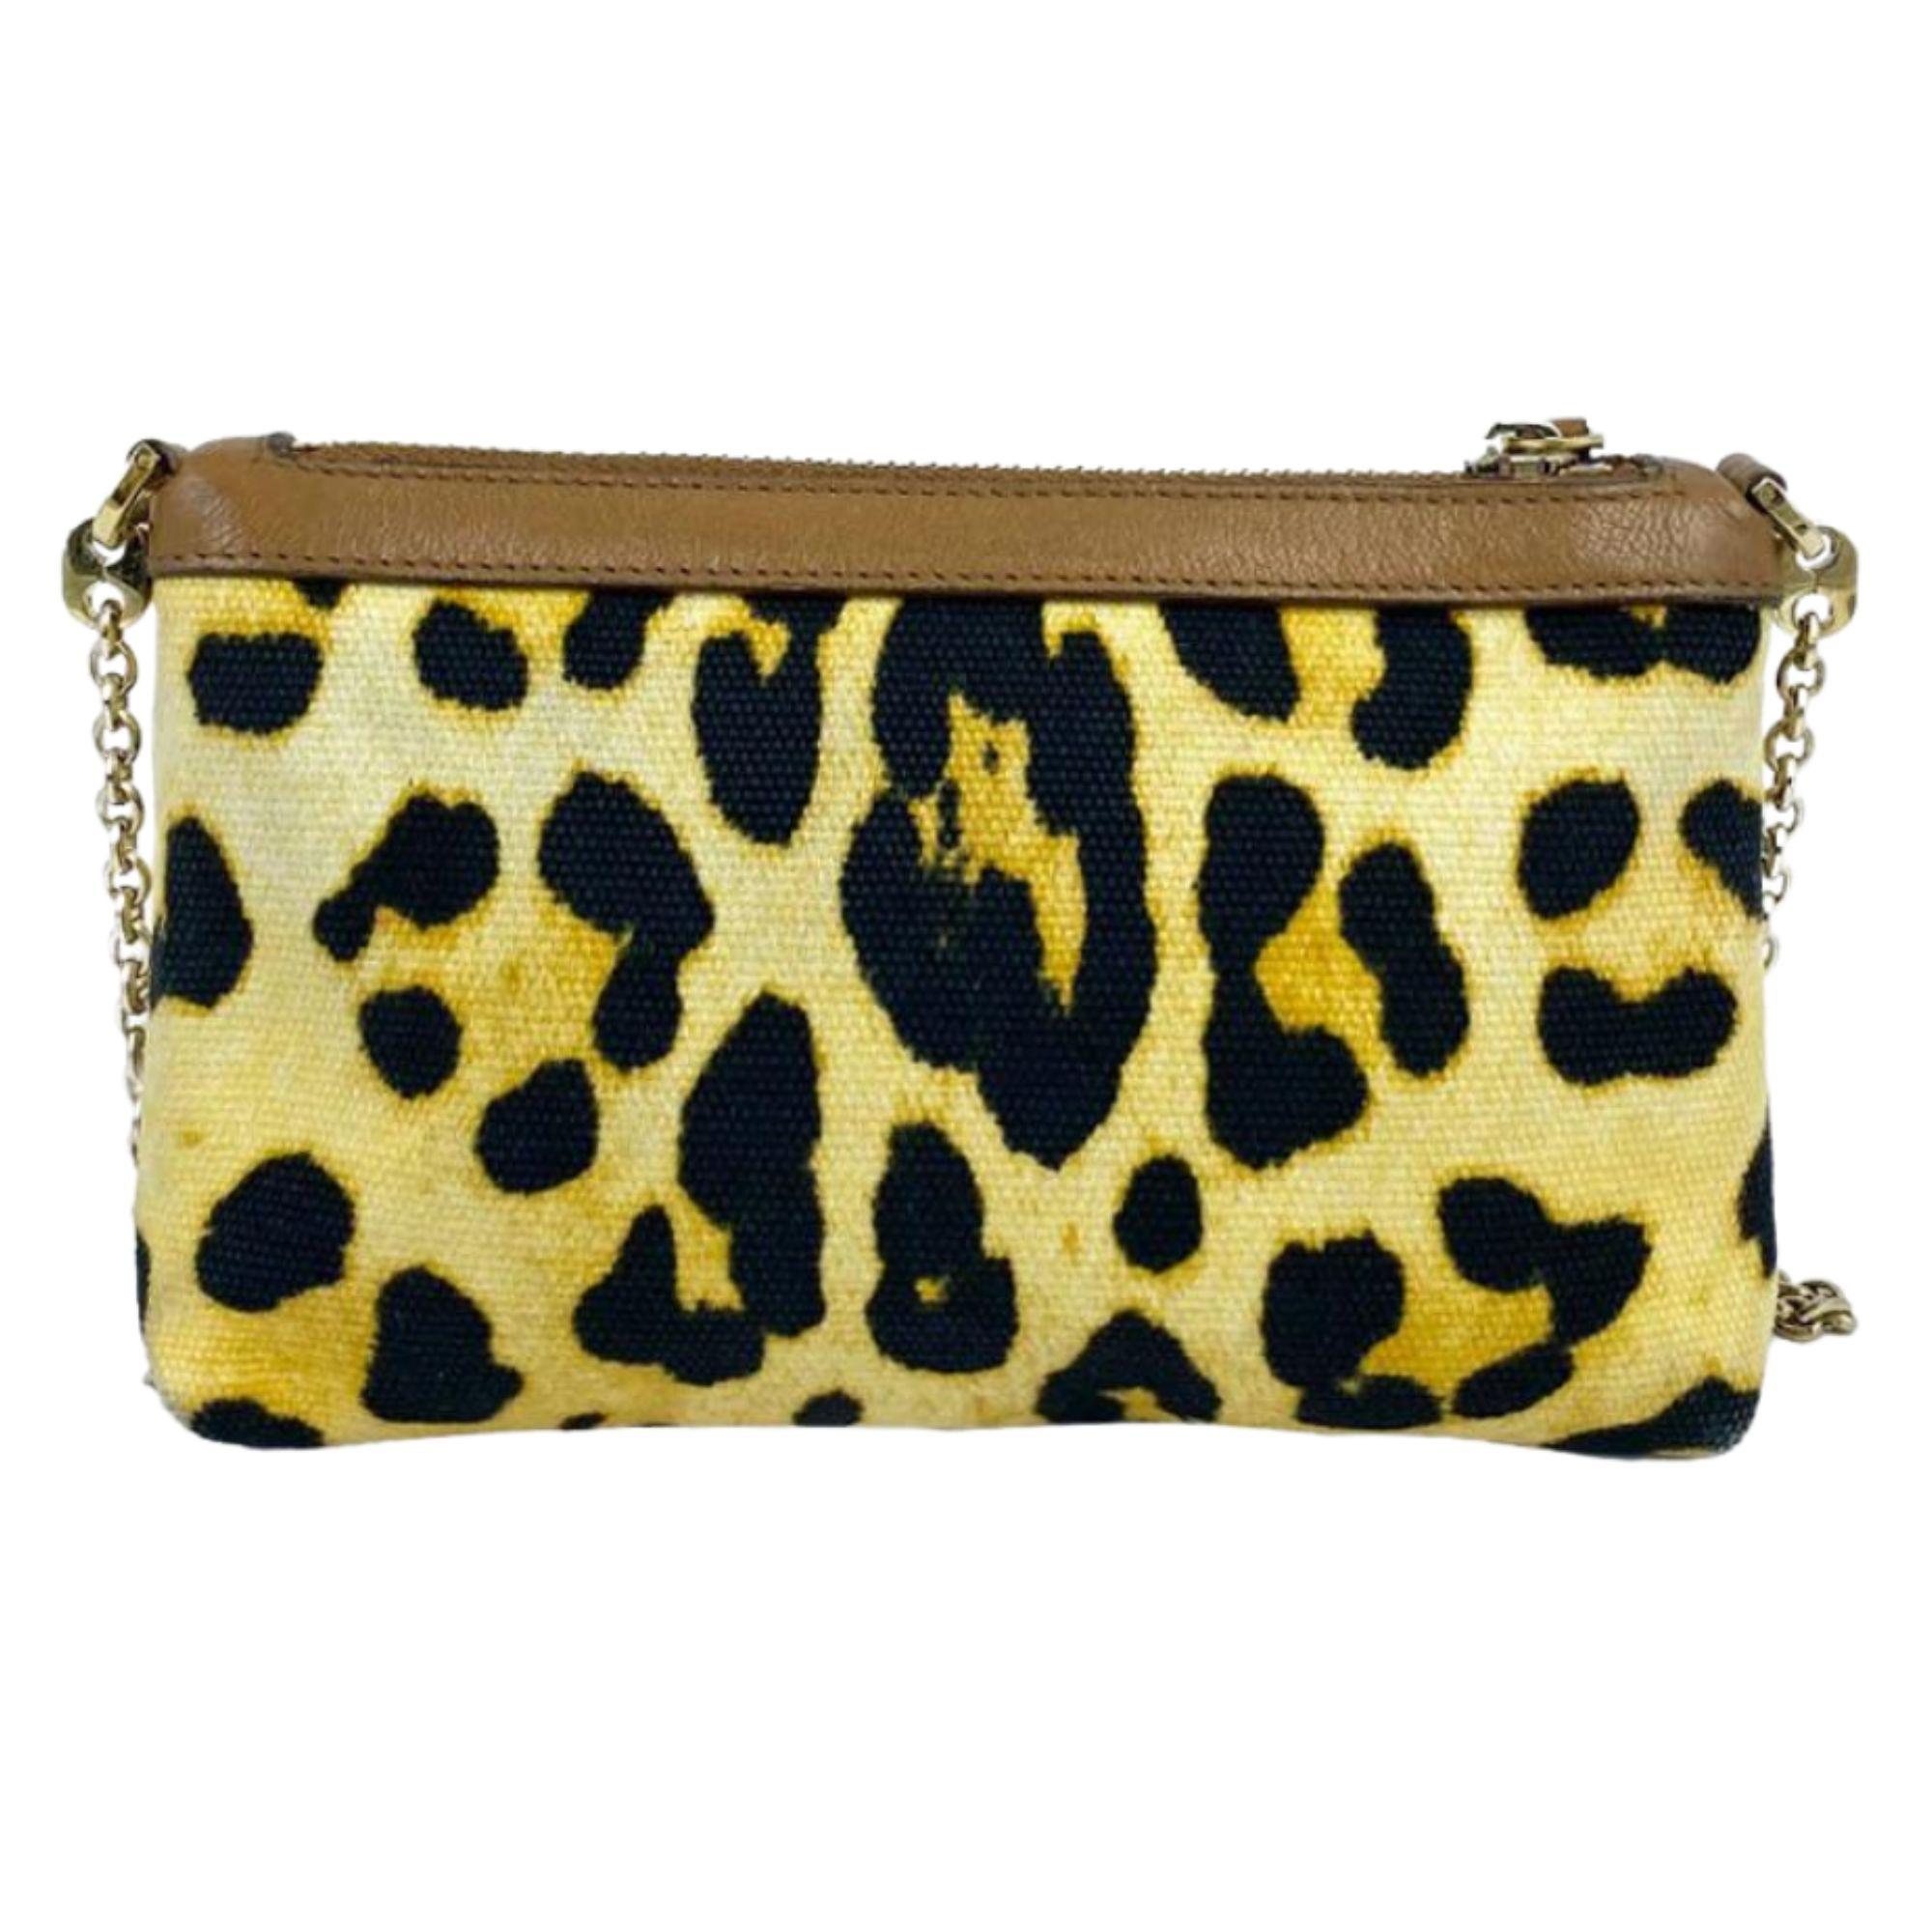 Dolce & Gabbana Leopard Print Crossbody Bag, Features a Chain Strap, Brown Leather Lining, Logo Plaque at Front, One Interior Pocket and Zipper Closure.

Material: Fabric and Leather
Hardware: Gold
Height: 12cm
Width: 19cm
Depth: 2cm
Handle Drop: